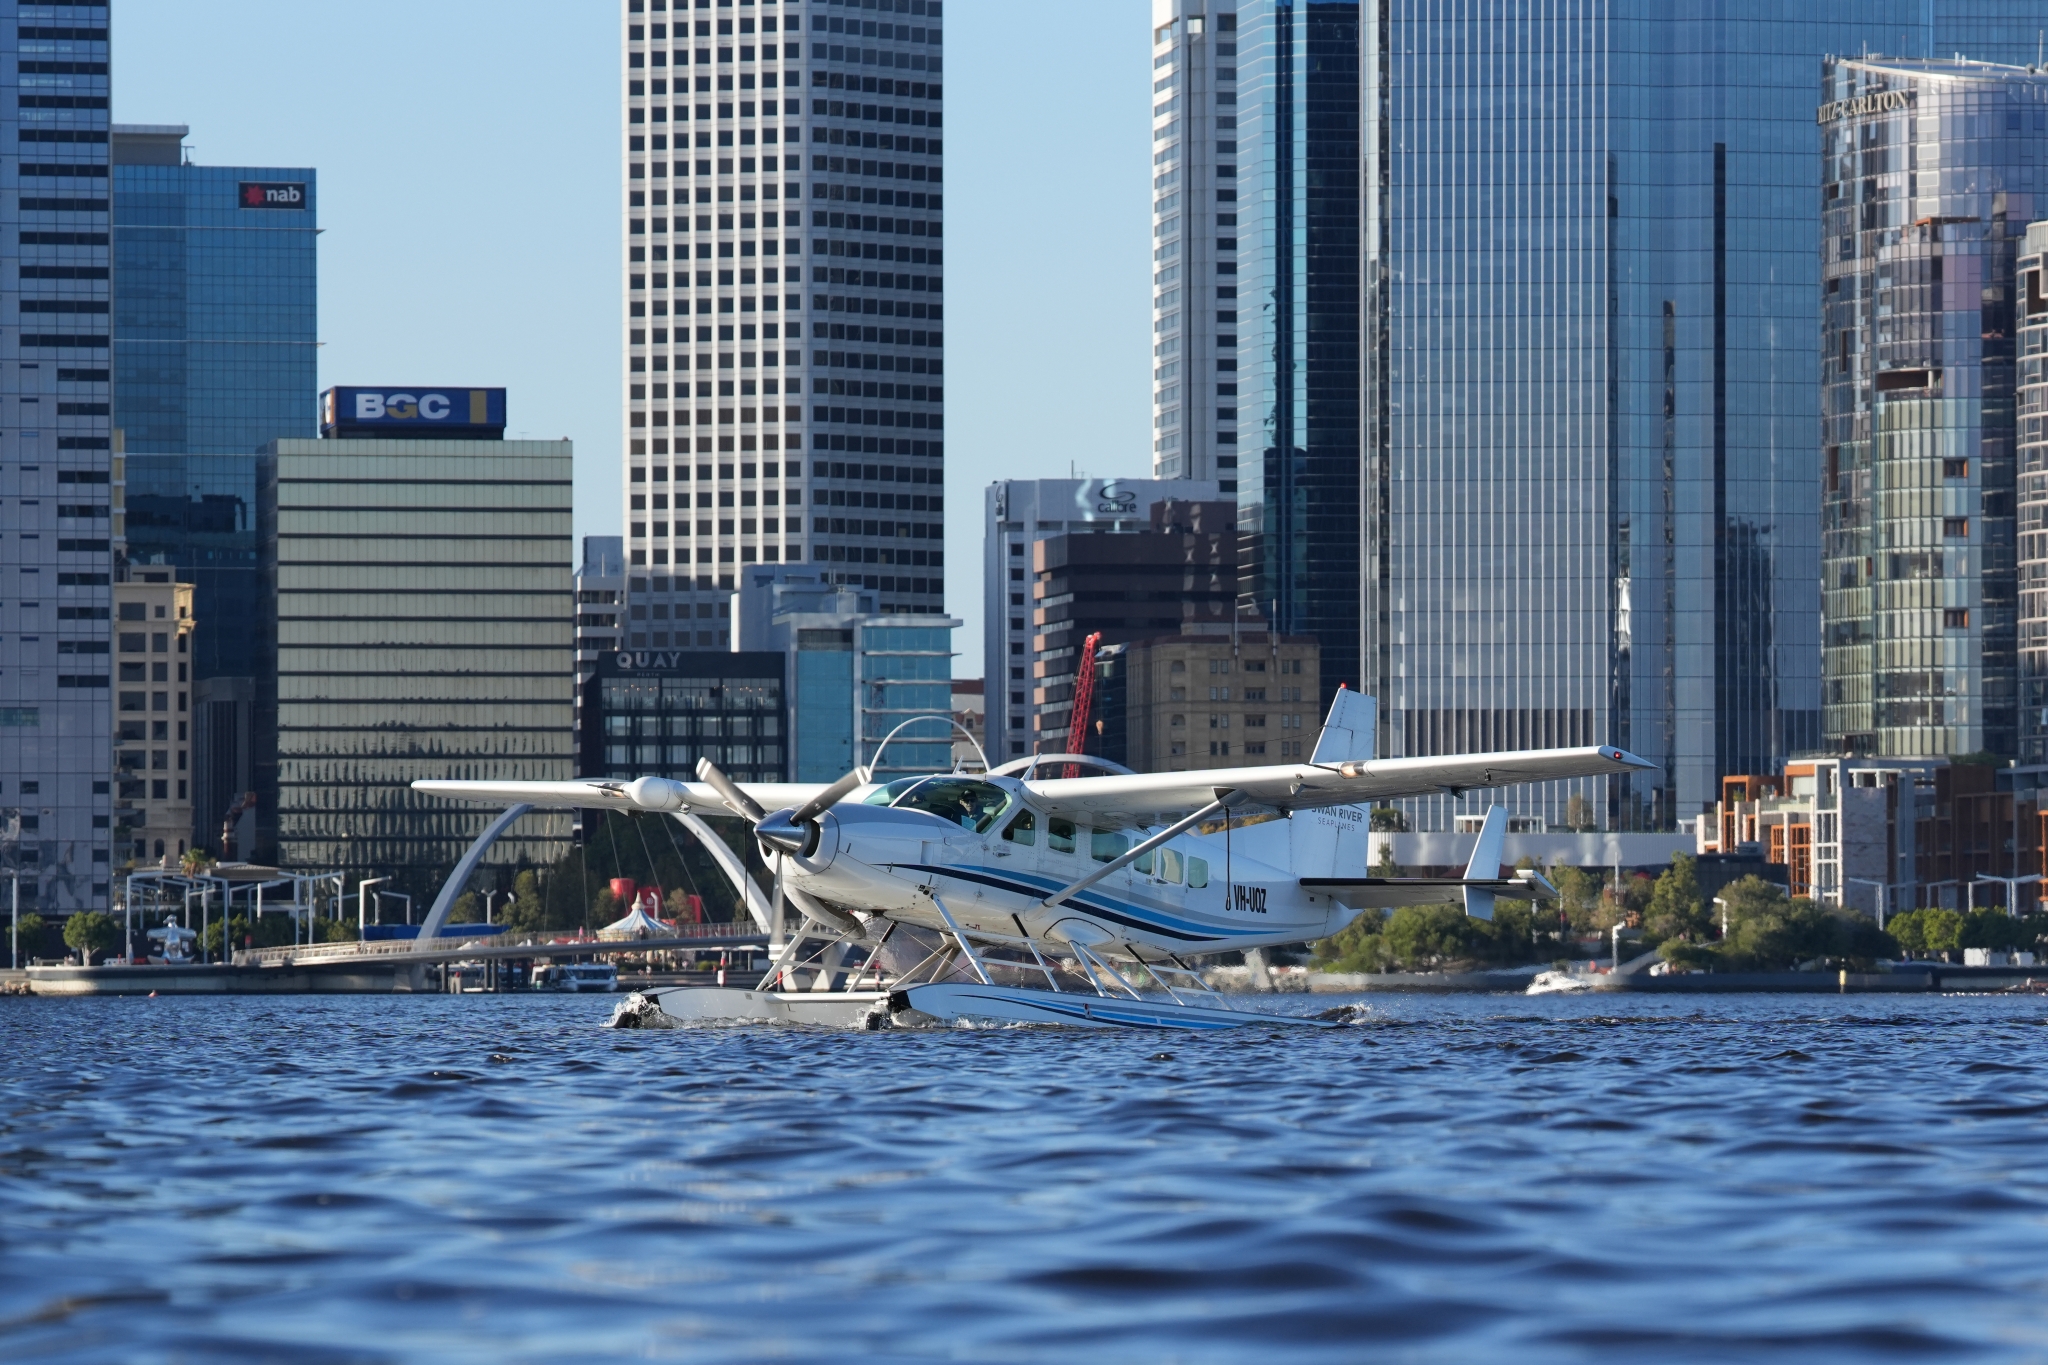 Plane taking off from water with a cityscape in the background